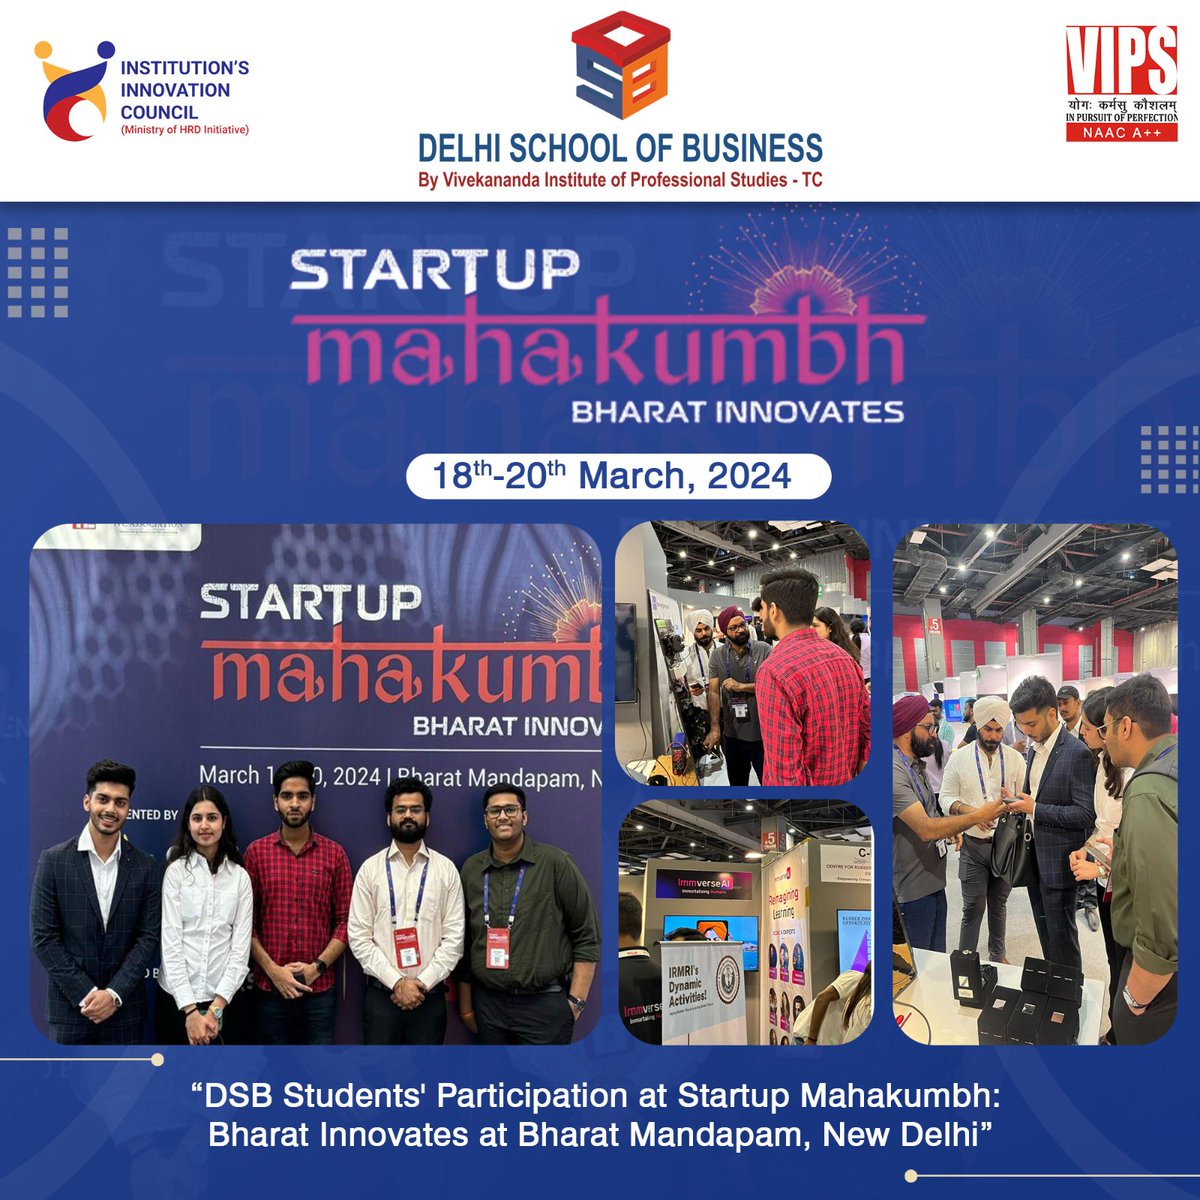 Shoutout to all the students from Delhi School of Business who participated in Startup Mahakumbh held from 18 to 20 March, at Bharat Mandapam, New Delhi. From meeting well-known innovators to exploring new startup companies, the students learned a great deal. #BharatInnovates